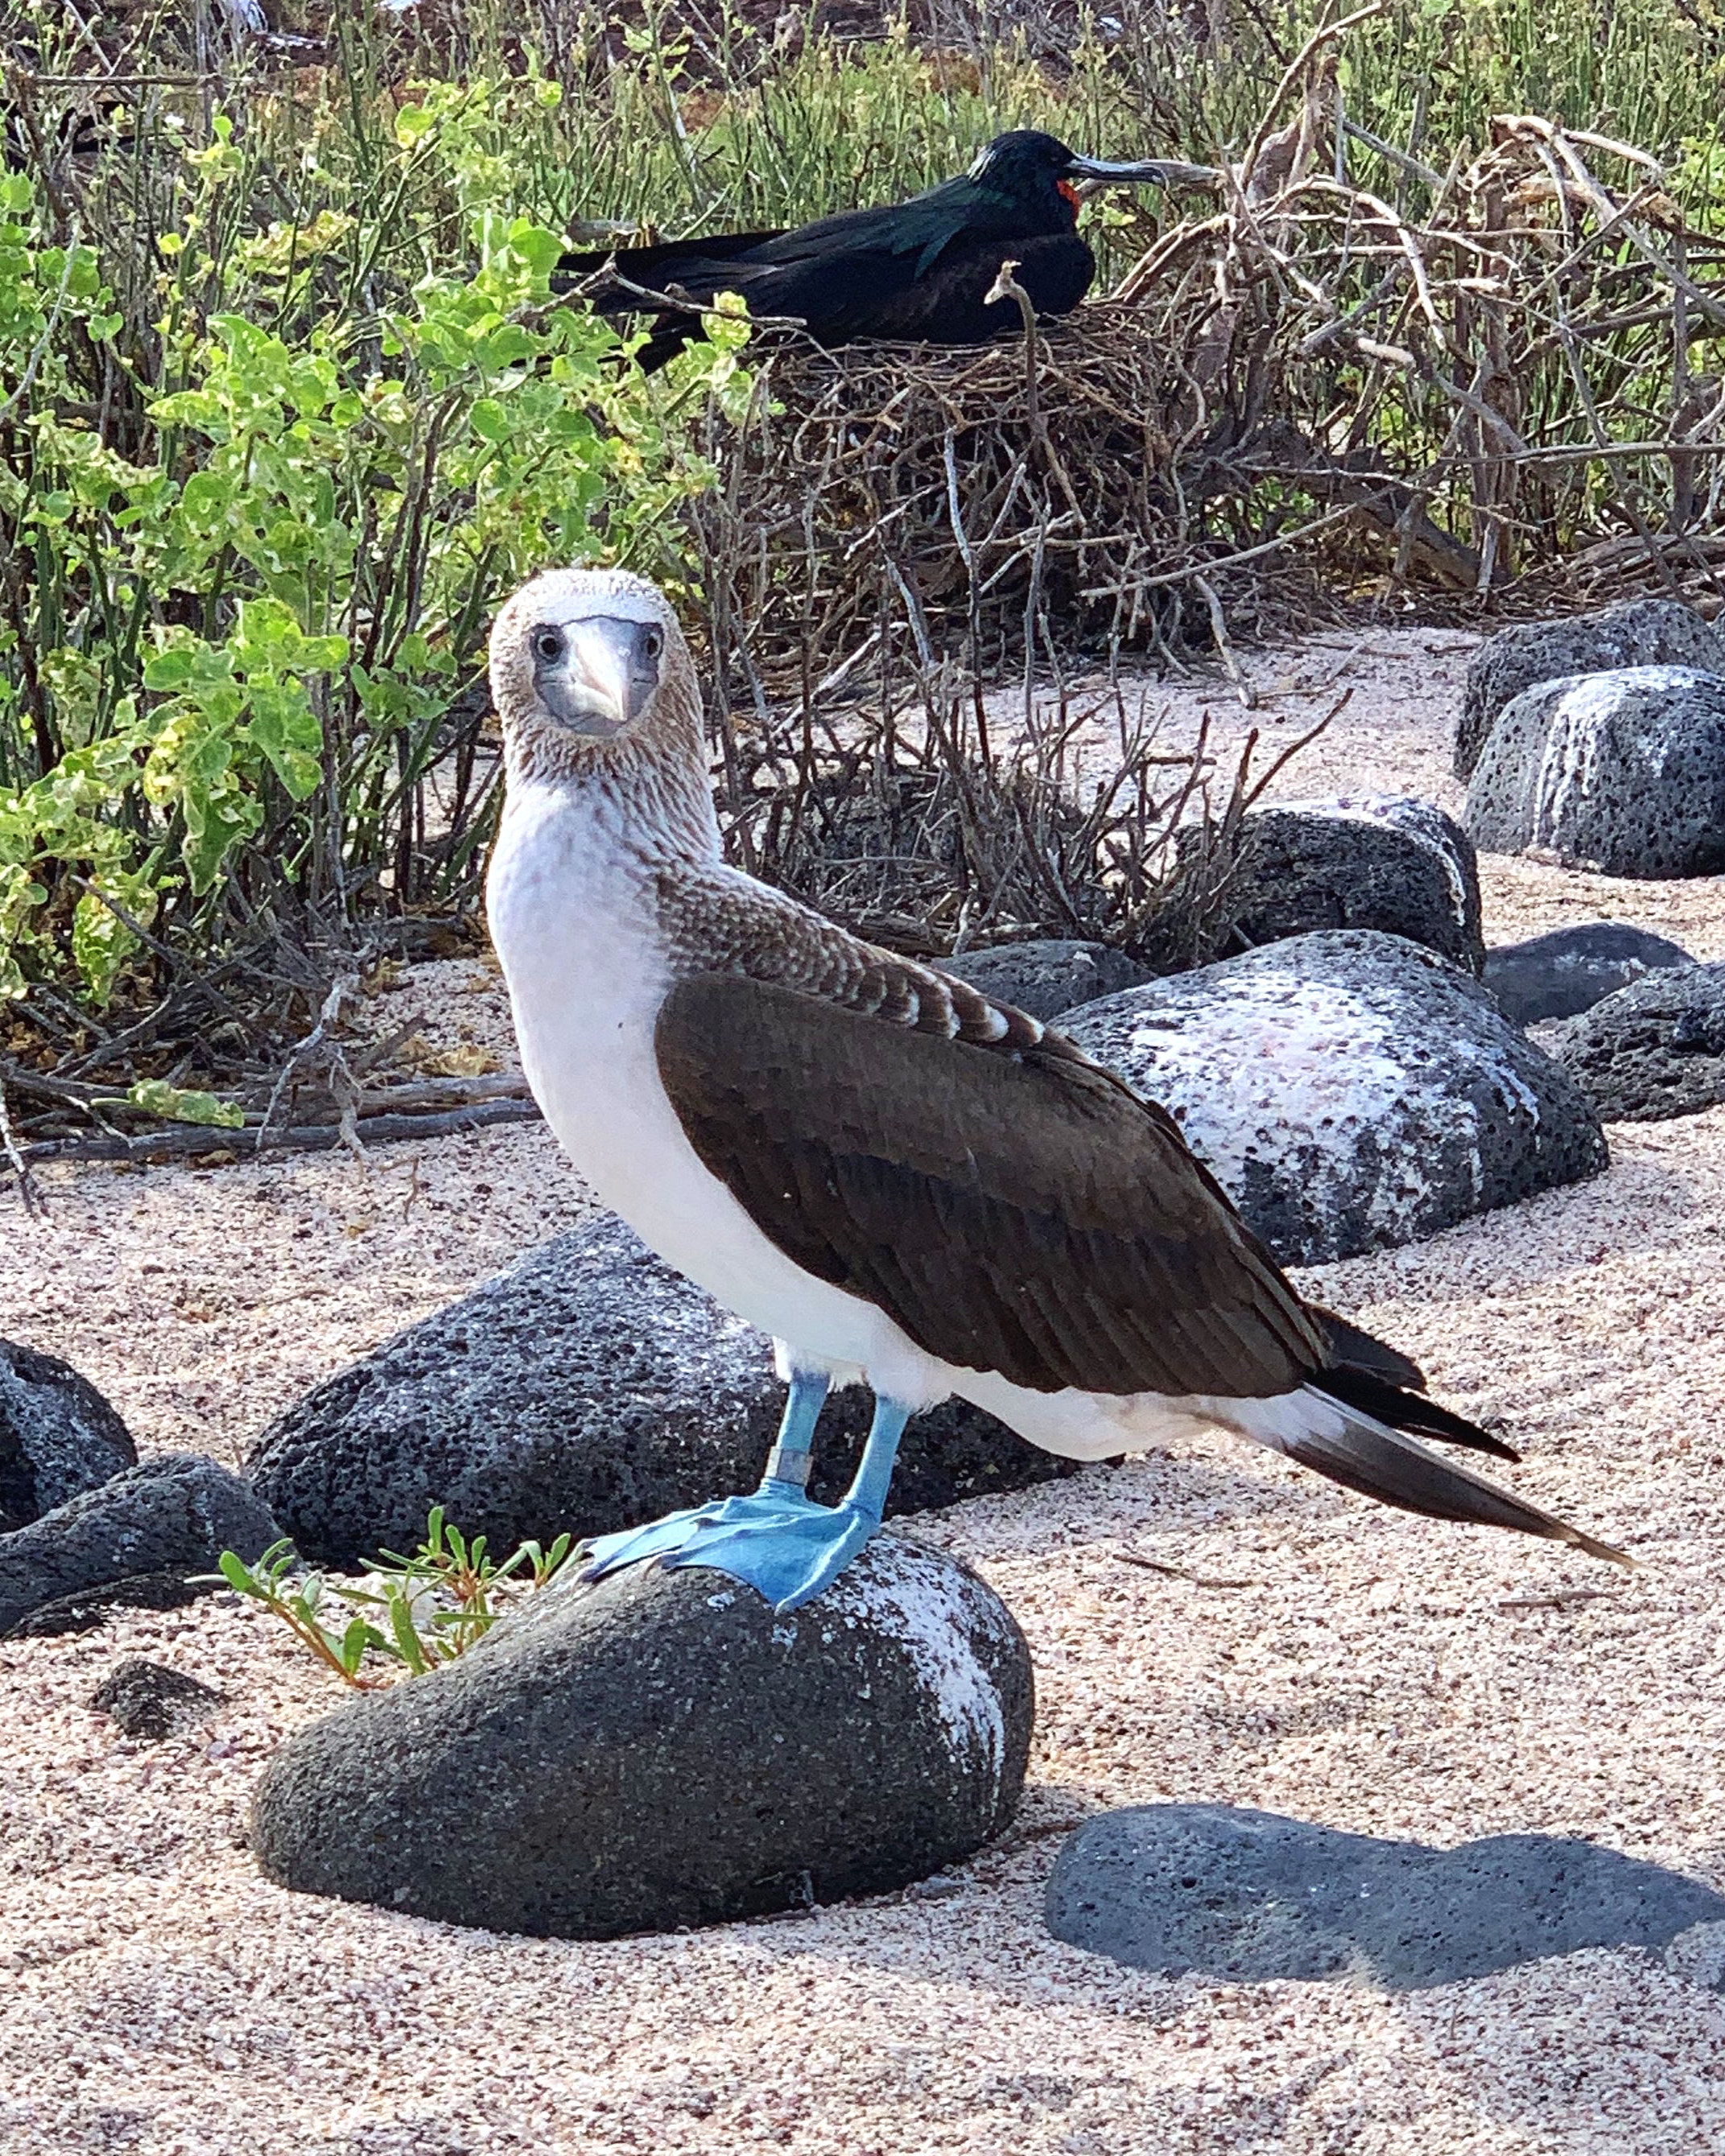  Our new favourite bird, the blue footed boobie.  